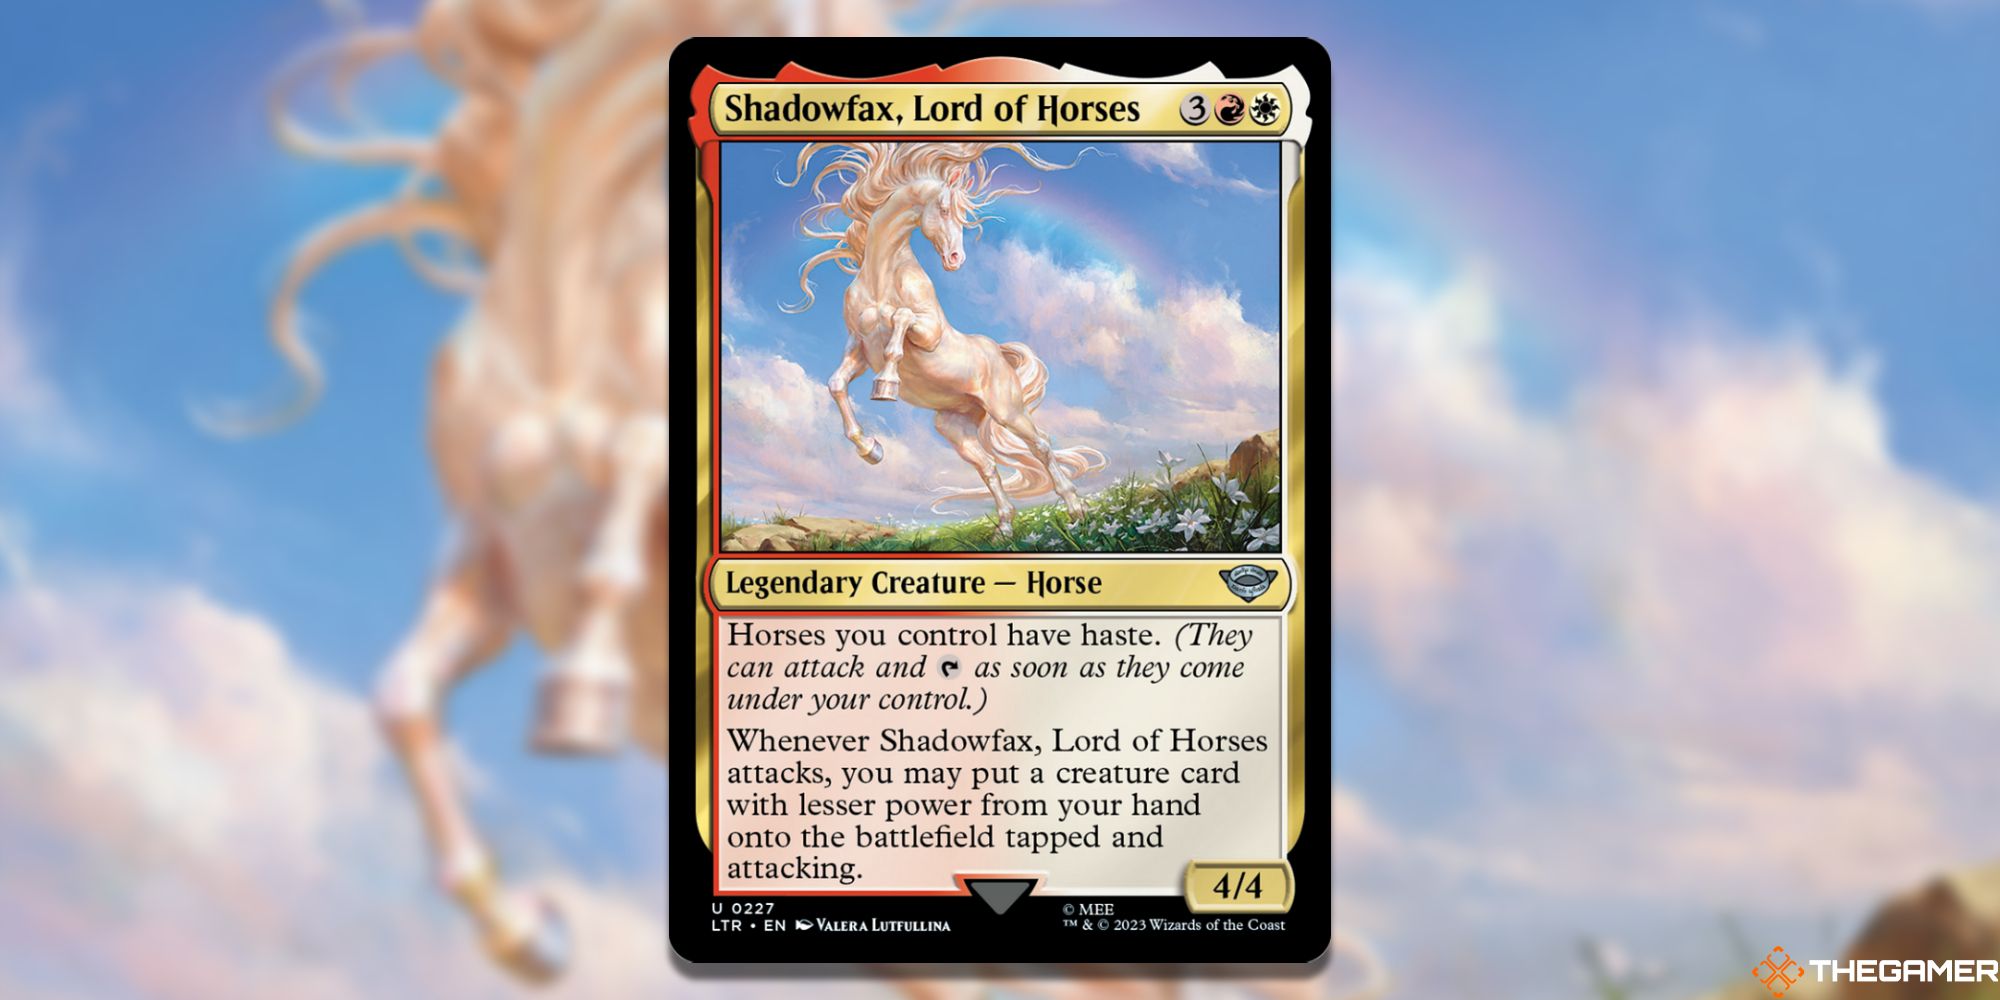     Image of Shadowfax, Lord of Horses card in Magic: The Gathering, with artwork by Valero Lutfullin